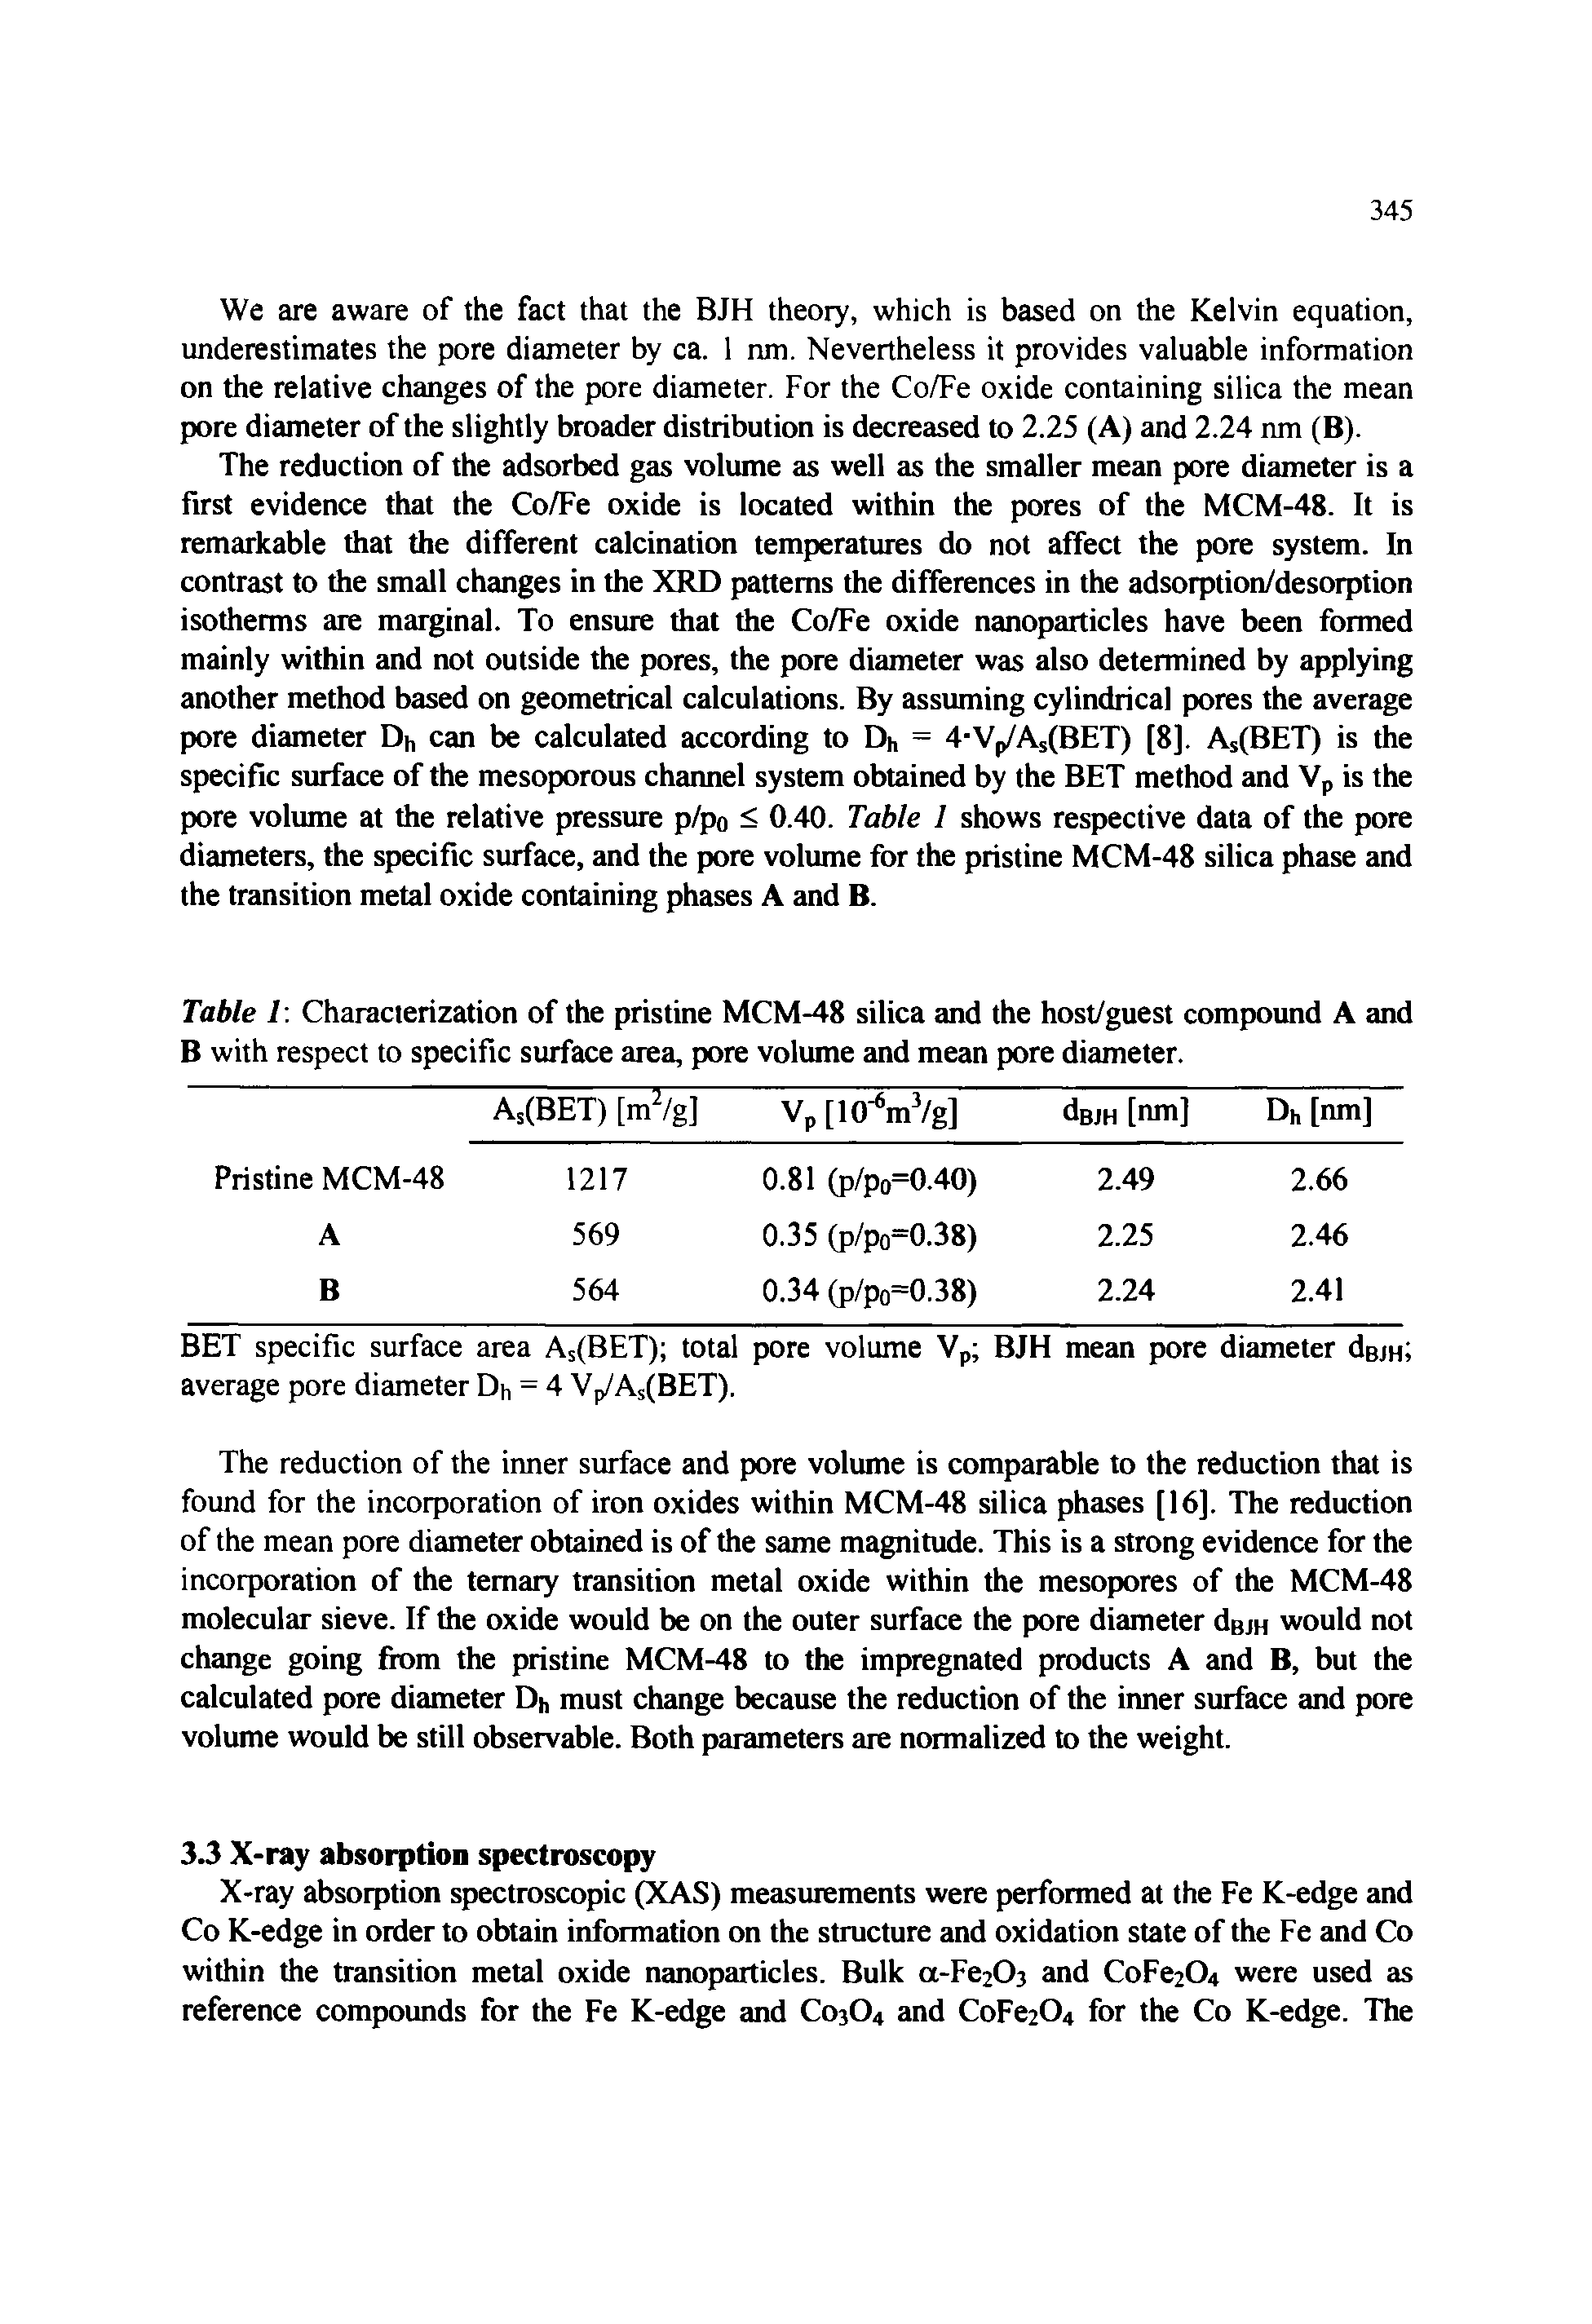 Table T. Characterization of the pristine MCM-48 silica and the host/guest compound A and B with respect to specific surface area, pore volume and mean pore diameter.